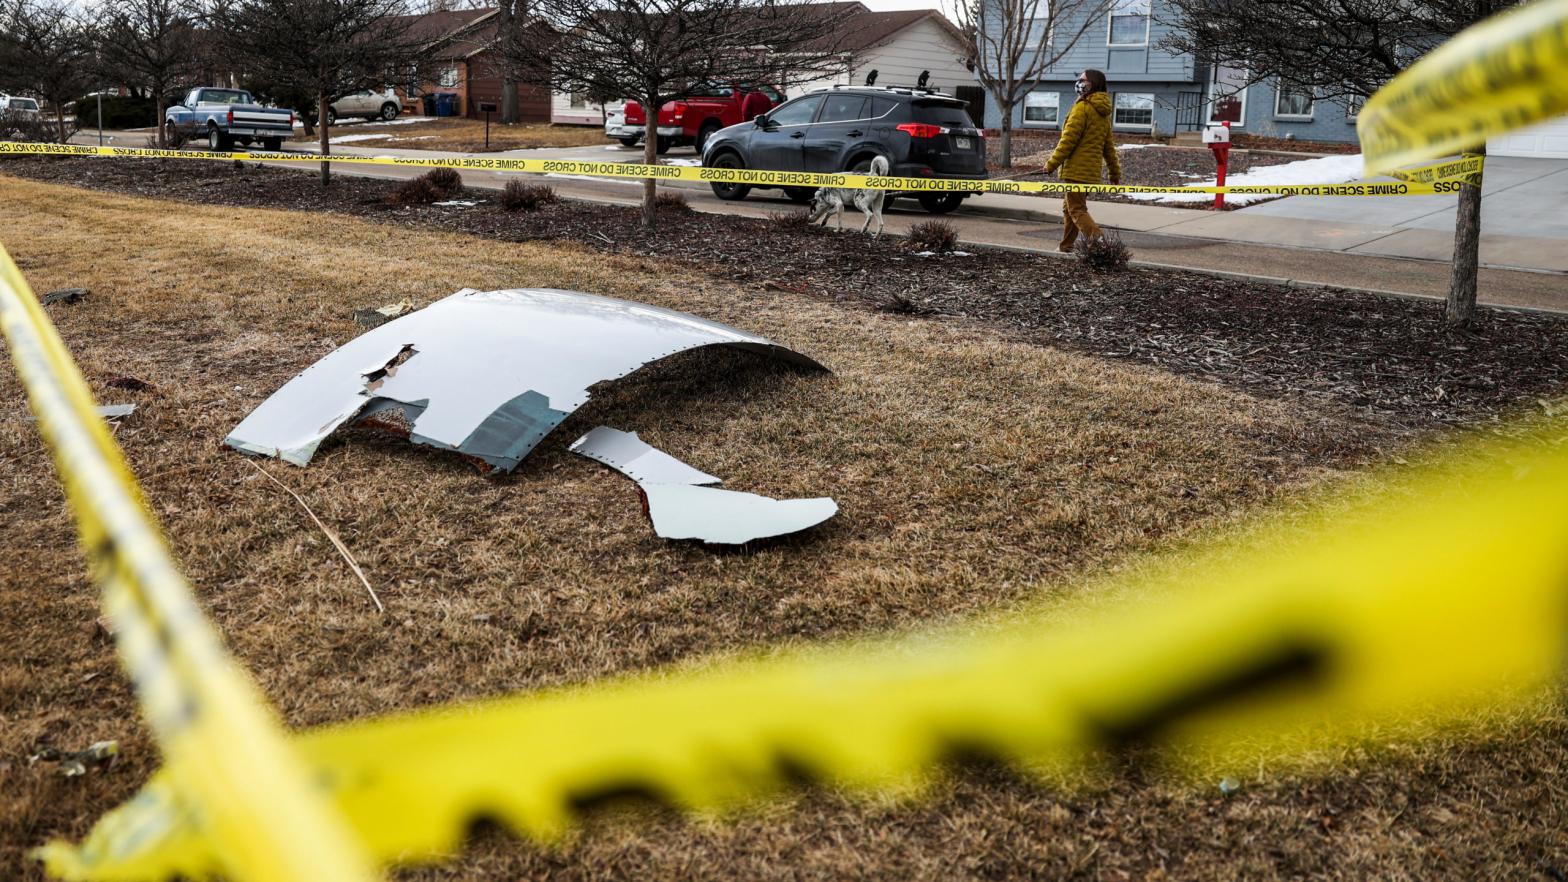 Pieces of an aeroplane engine from Flight 328 sit scattered in a neighbourhood on February 20, 2021 in Broomfield, Colorado.  (Photo: Michael Ciaglo, Getty Images)